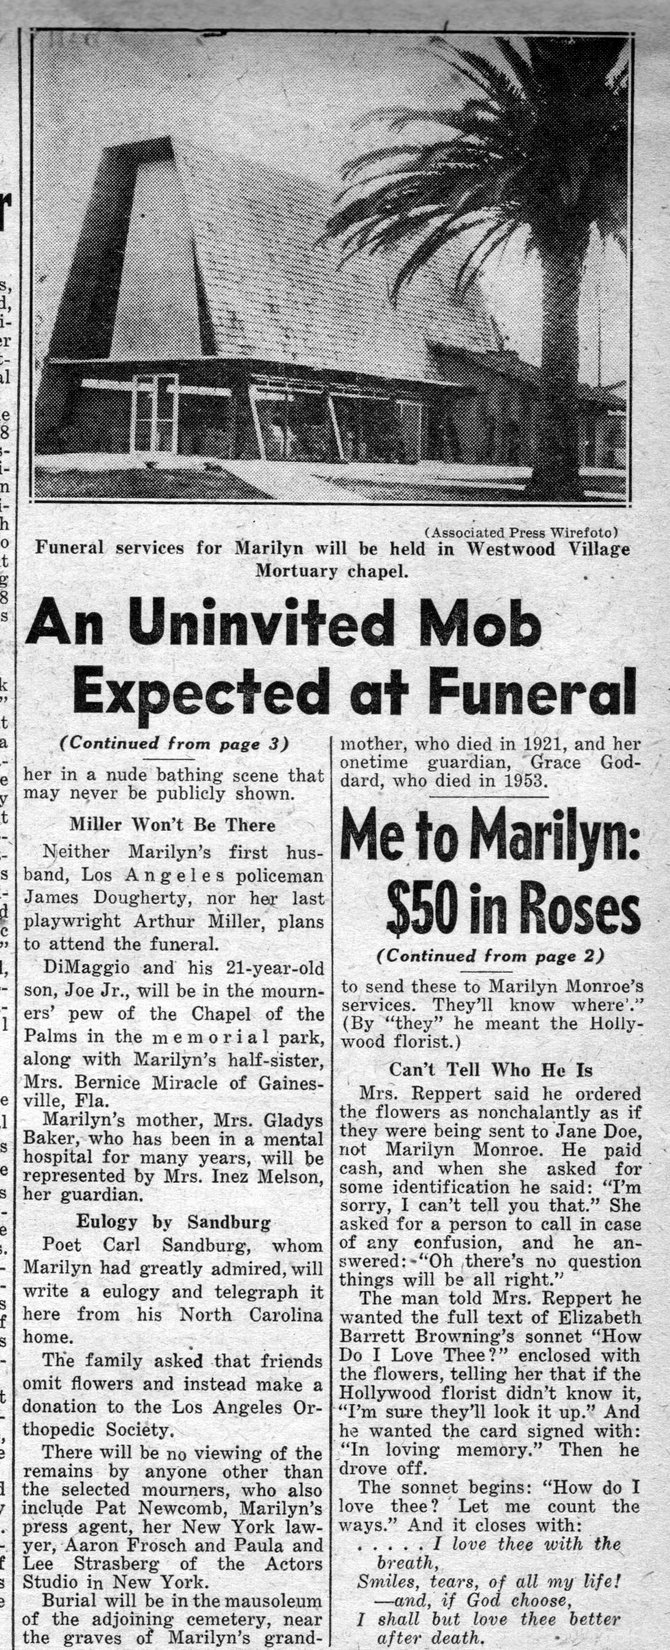 NEW YORK DAILY NEWS, Wednesday, August 8, 1962.